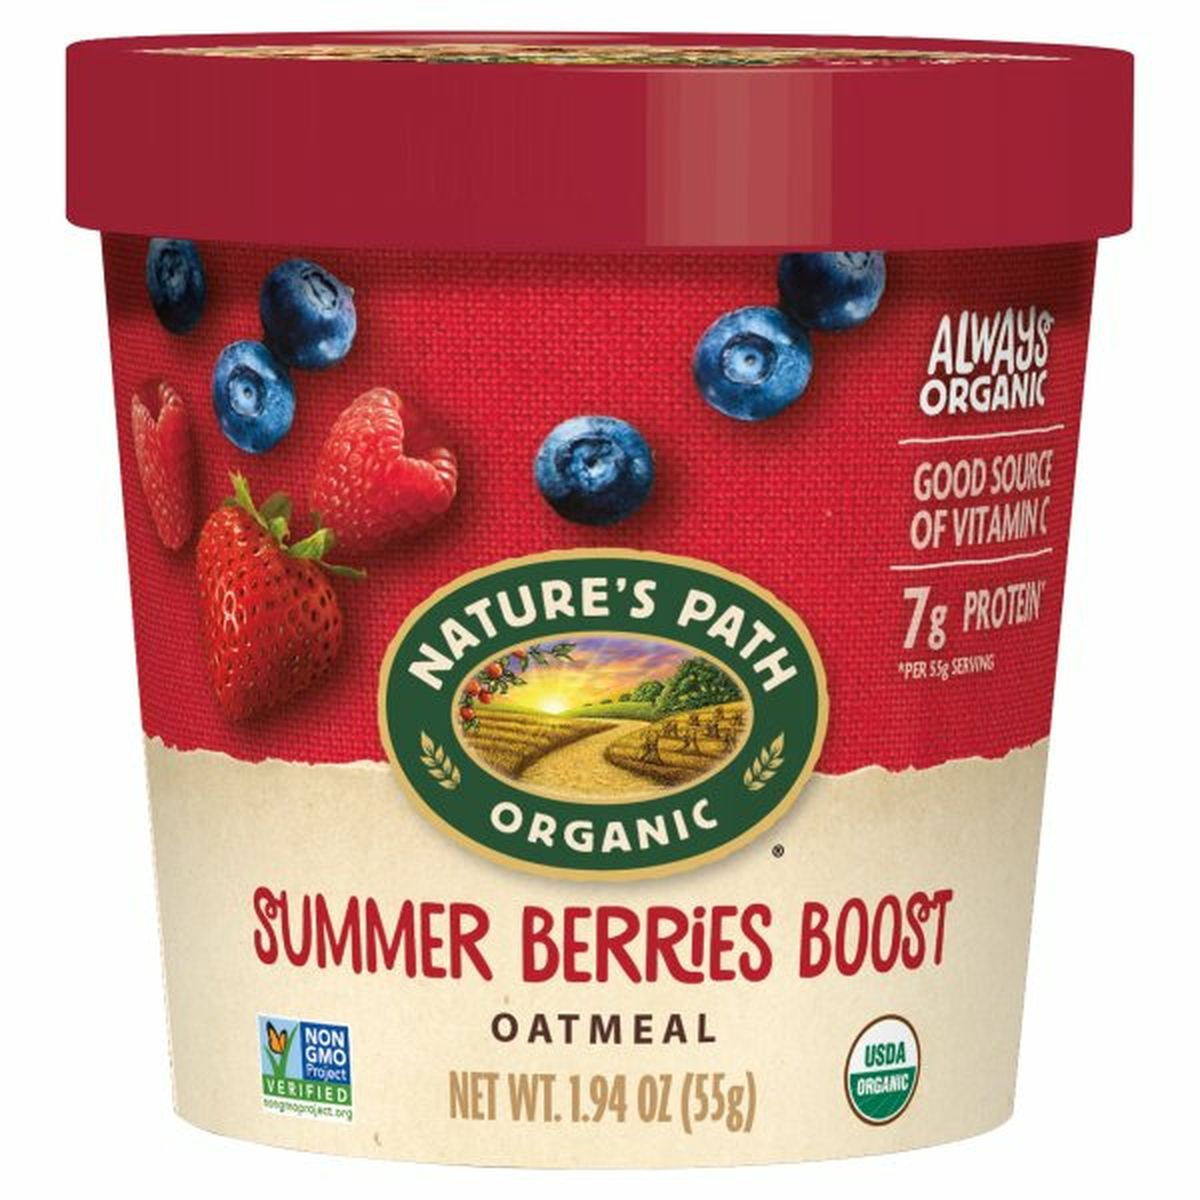 Calories in Nature's Path Oatmeal, Organic, Summer Berries Boost